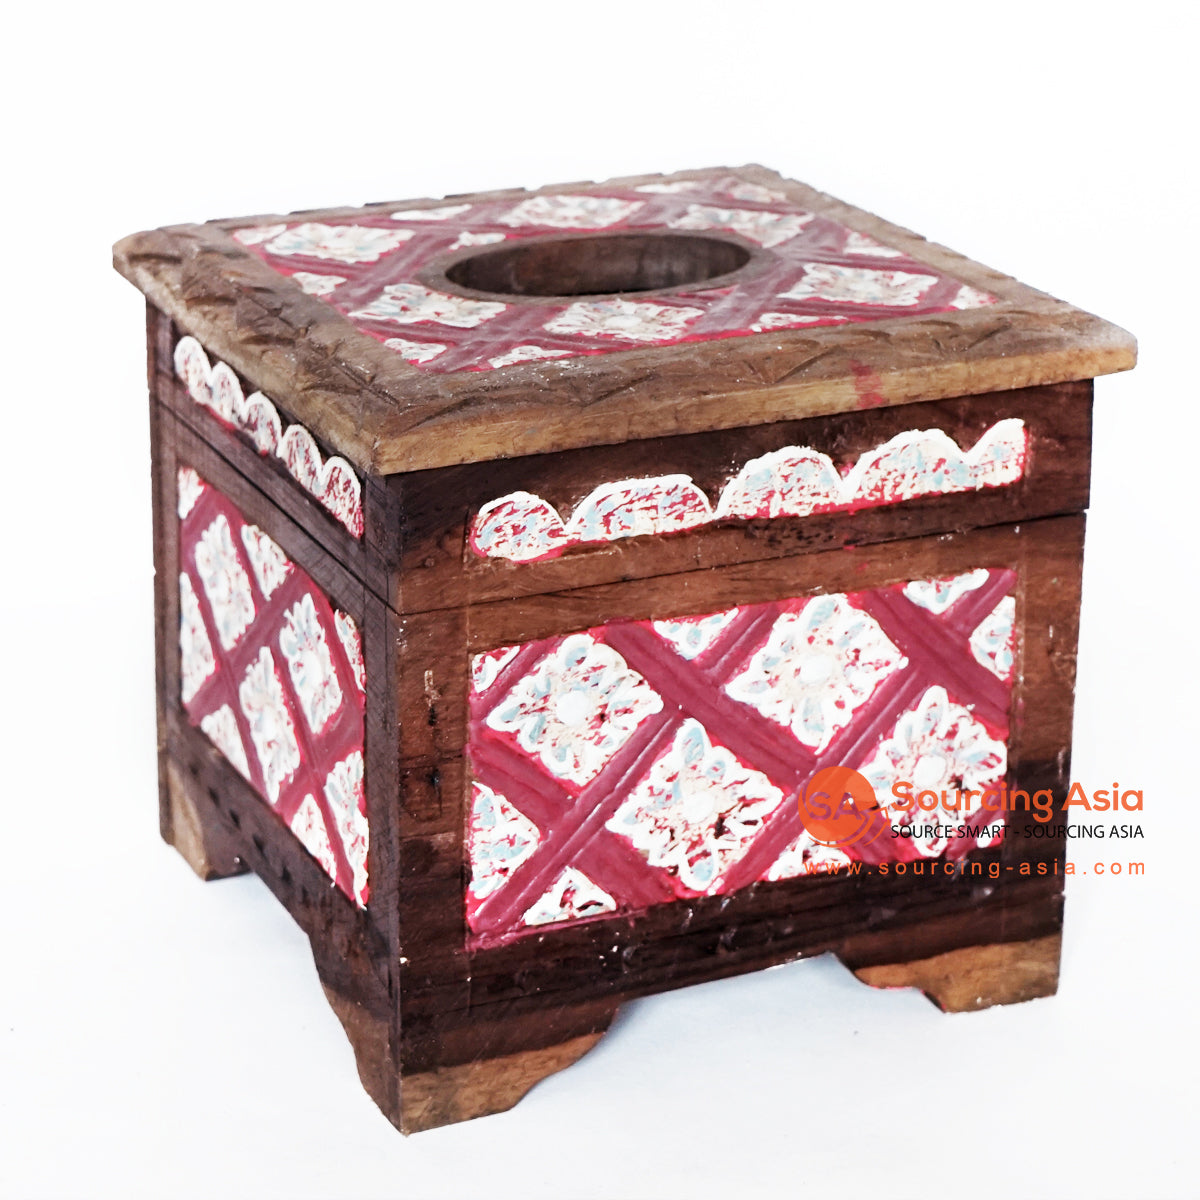 MANC075-1 RED AND WHITE WOODEN FLOWER CARVED SQUARE TISSUE BOX WITH LEGS